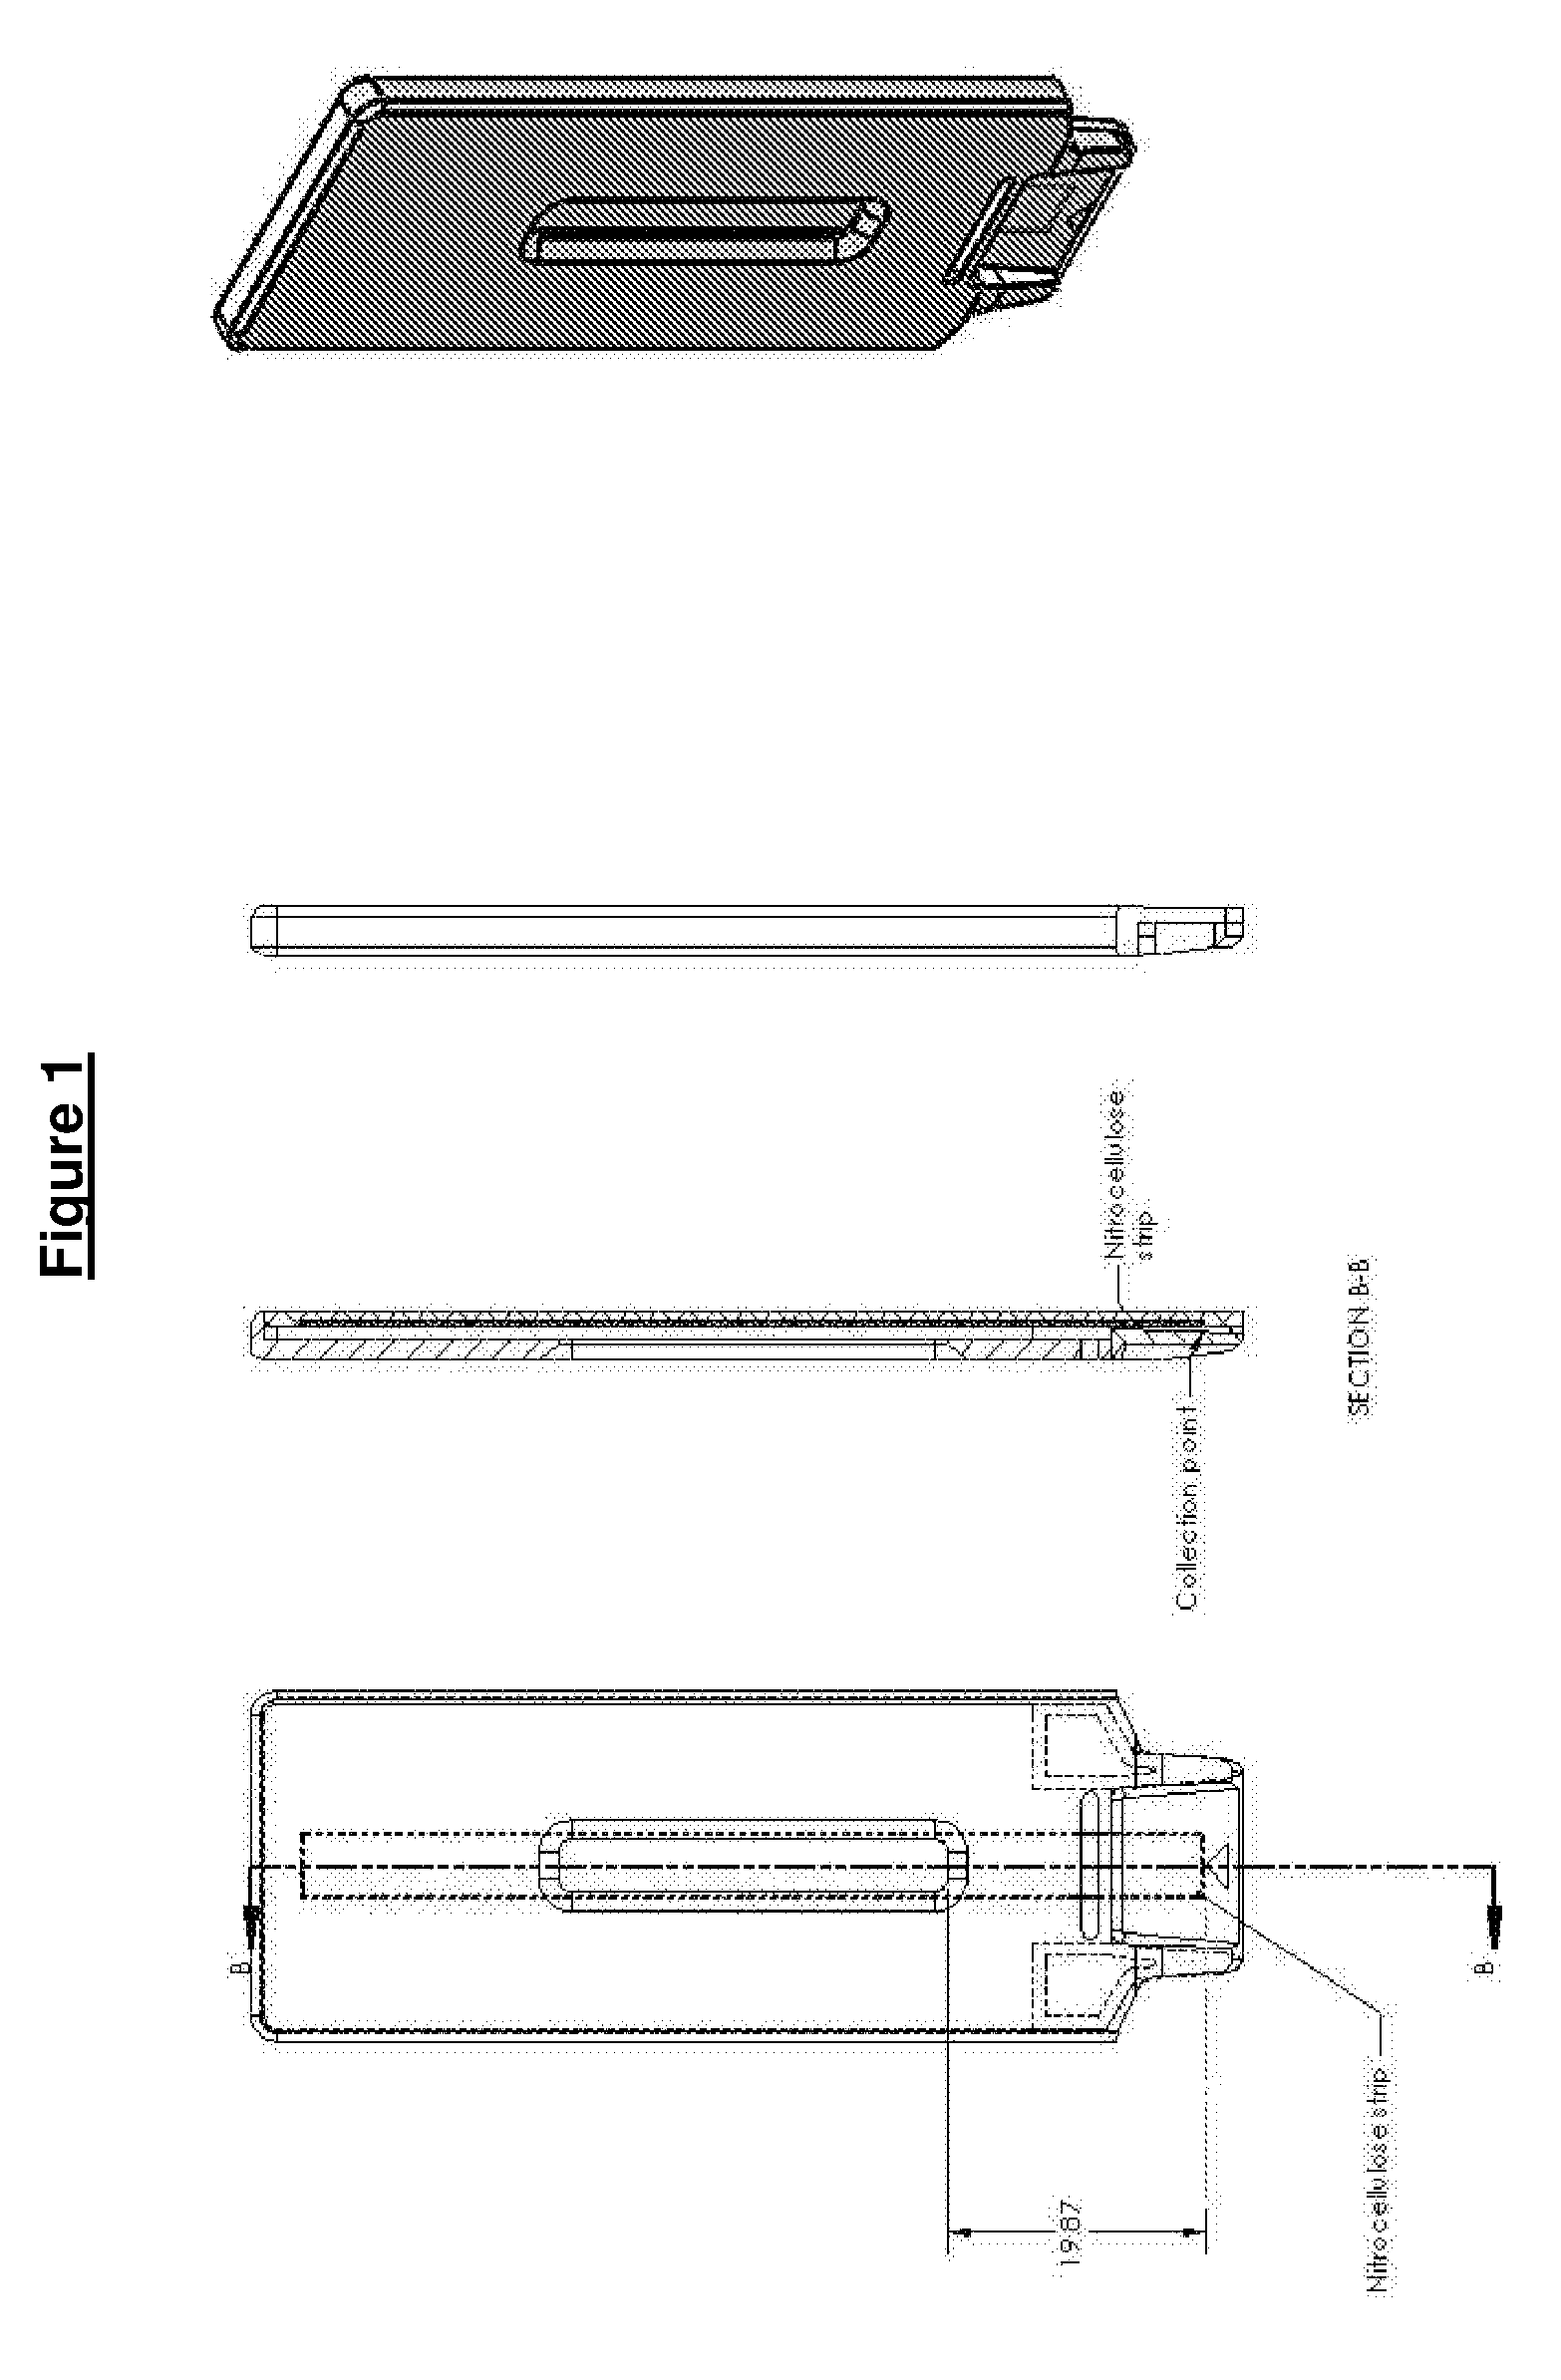 Device and Methods